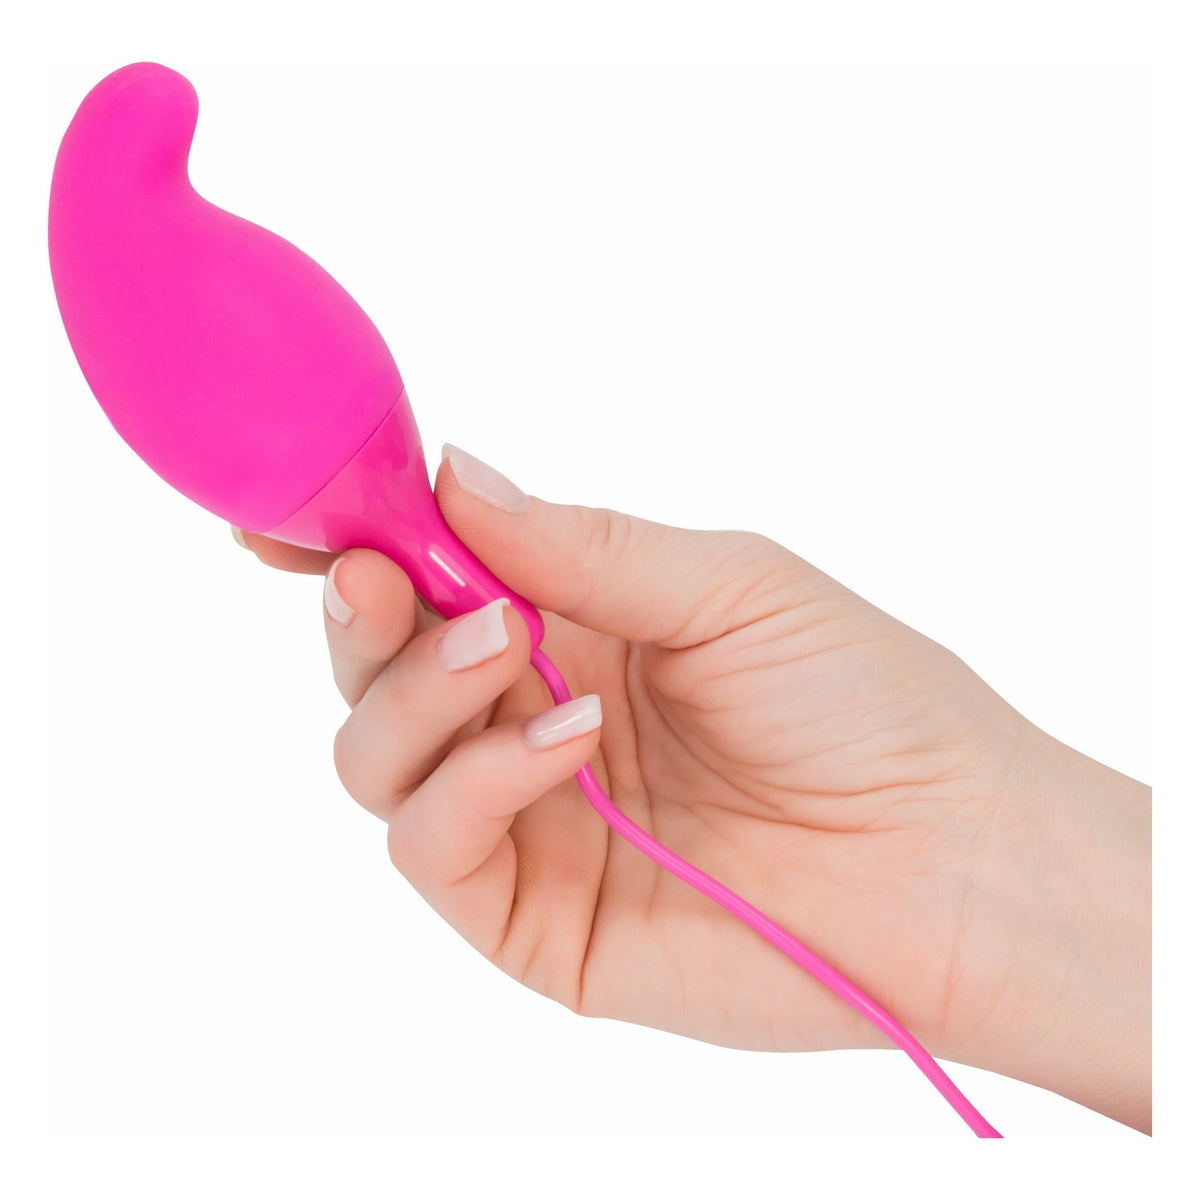 NMC Hold Tight - G-Spot Vibrator - Rechargeable - Pink